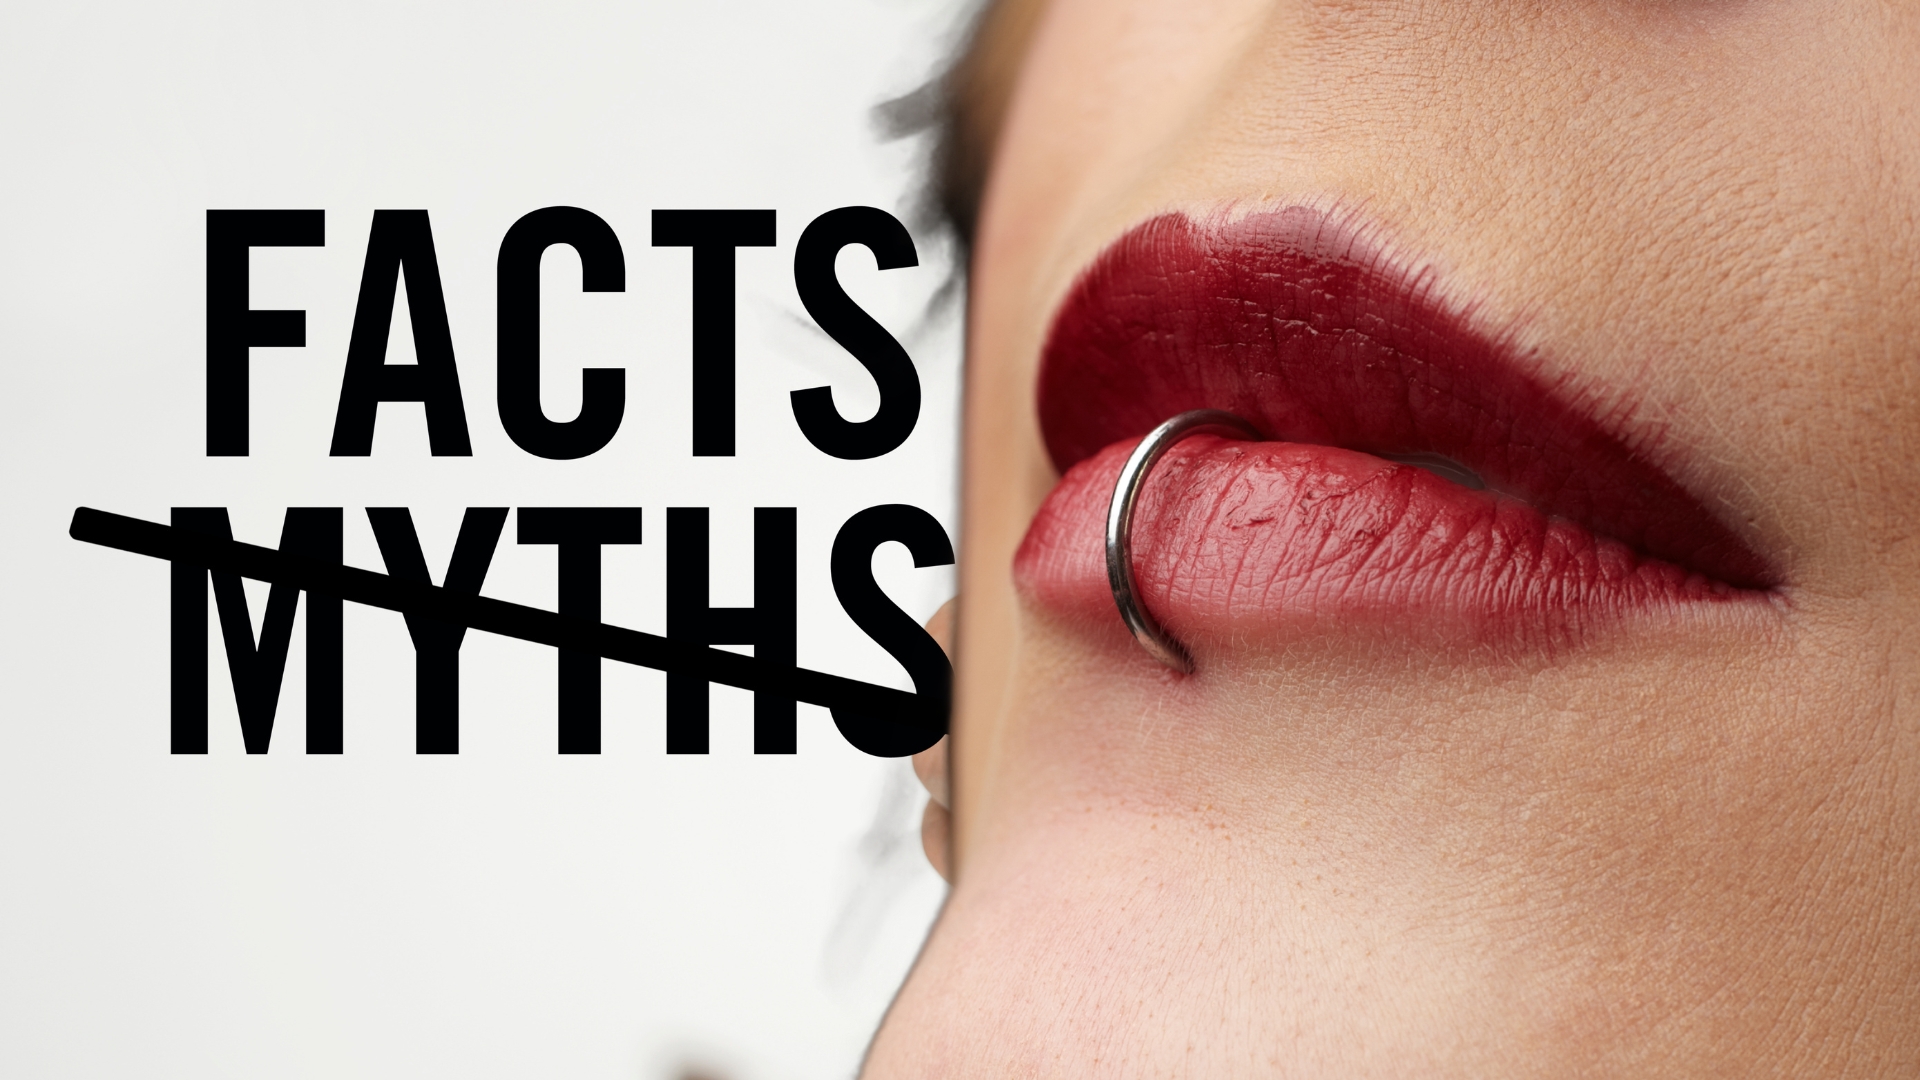 Piercing Myths That Are Not True